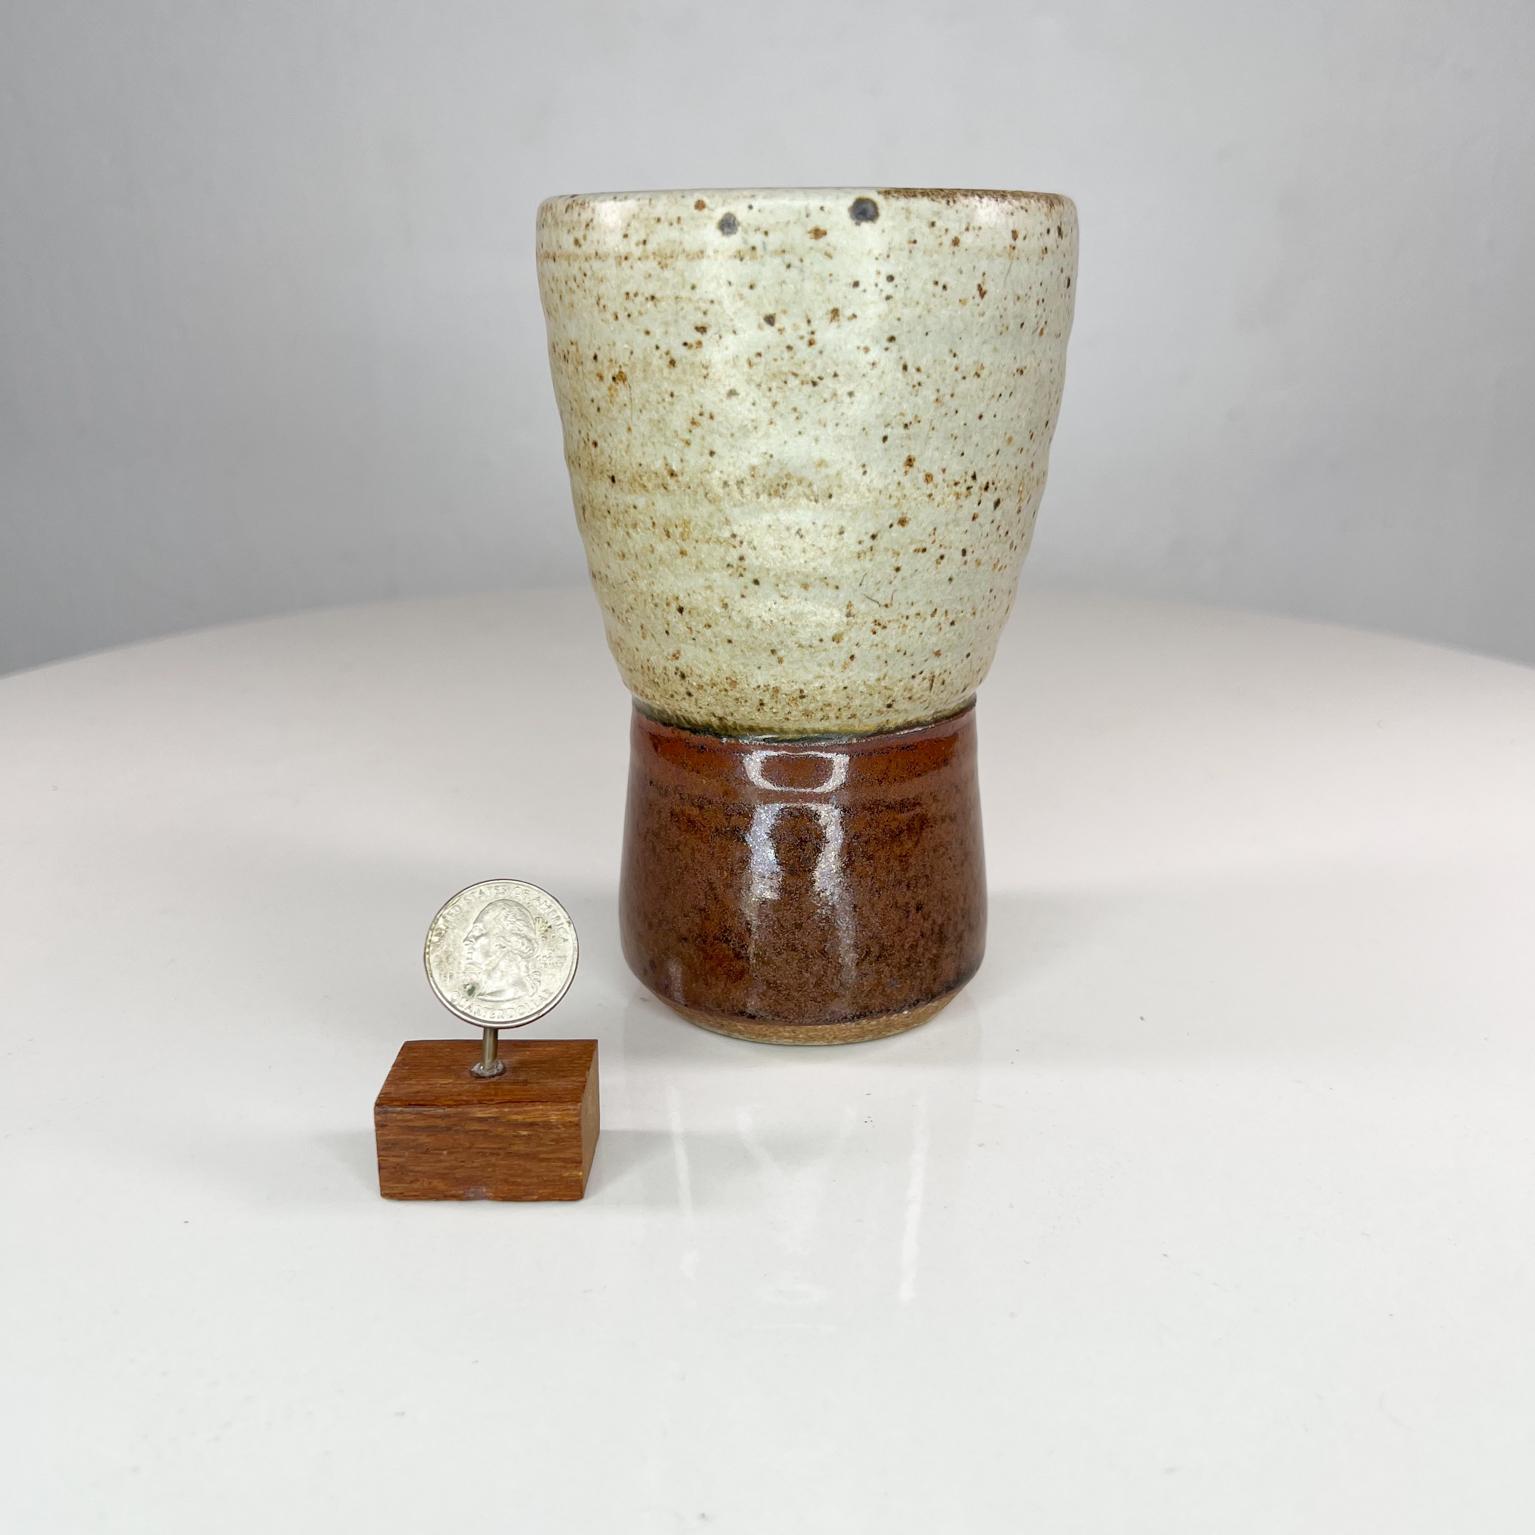 1970s Ceramic Art Pottery Tapered Tumbler Speckled Glass
3.75 diameter x 5.88 tall
Original good shape vintage clean presentation
Appears signed as MN
Refer to images shown please.

